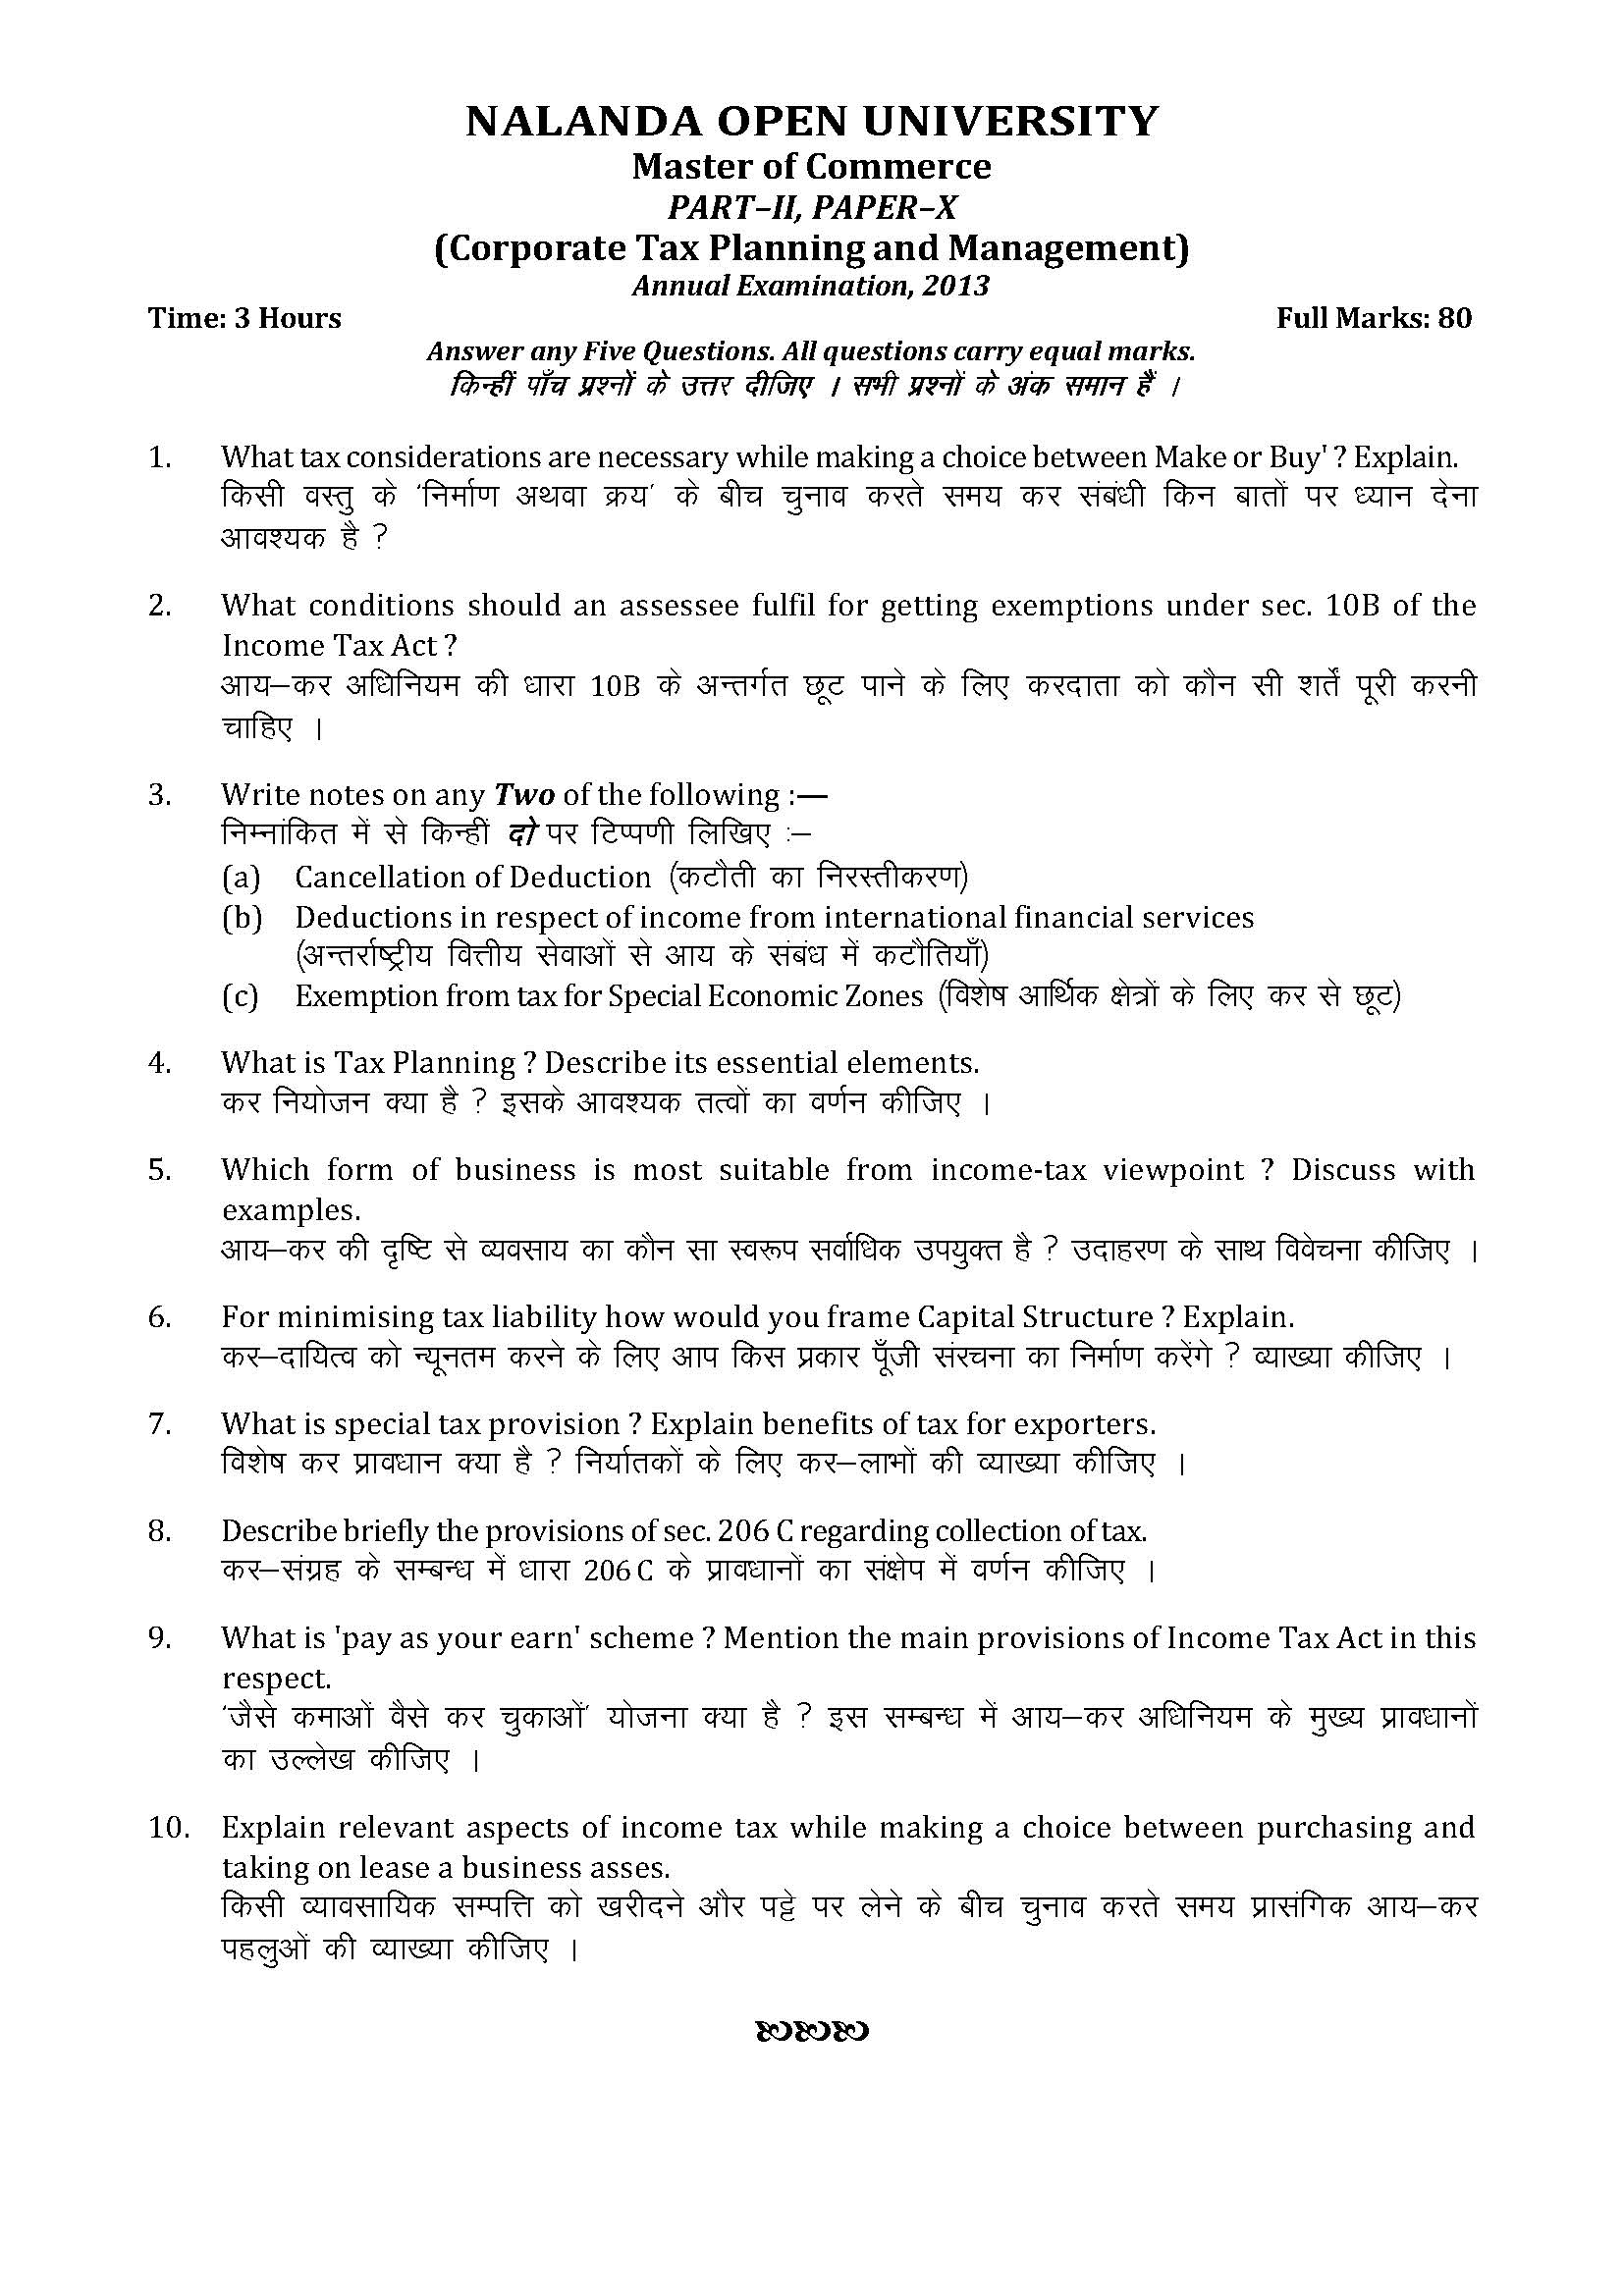 corporate tax planning sol question paper